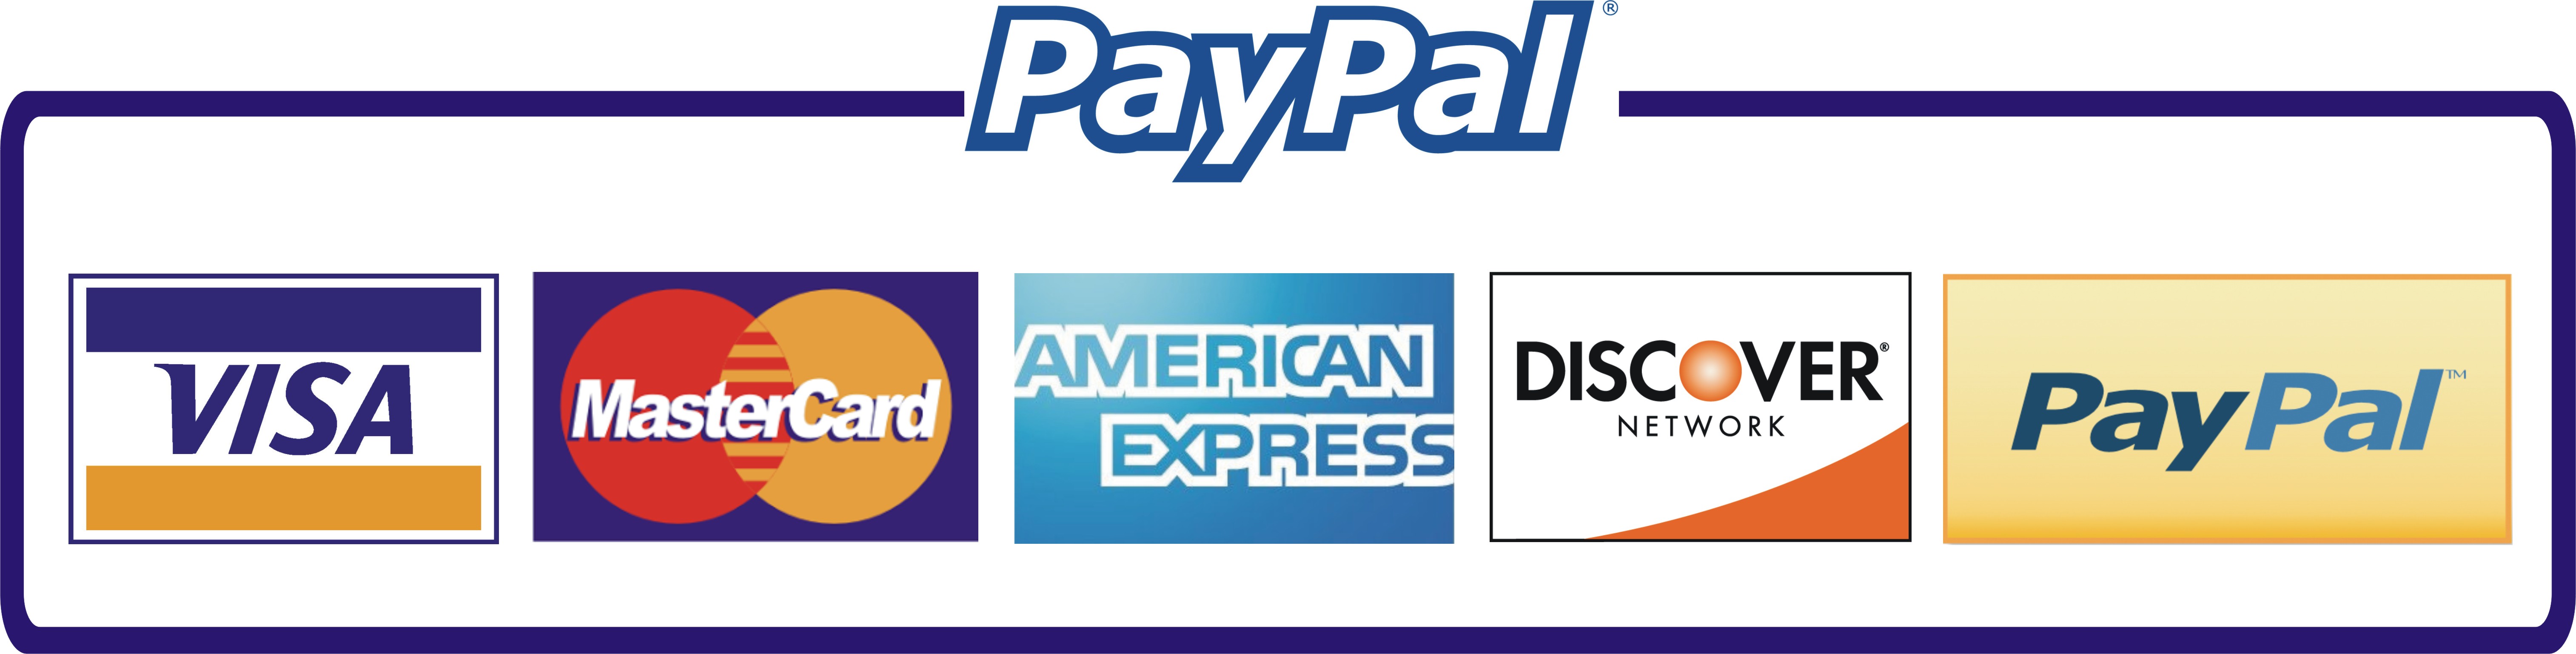 Accepted payments. PAYPAL логотип. Платежная система PAYPAL. PAYPAL картинки. PAYPAL accept.